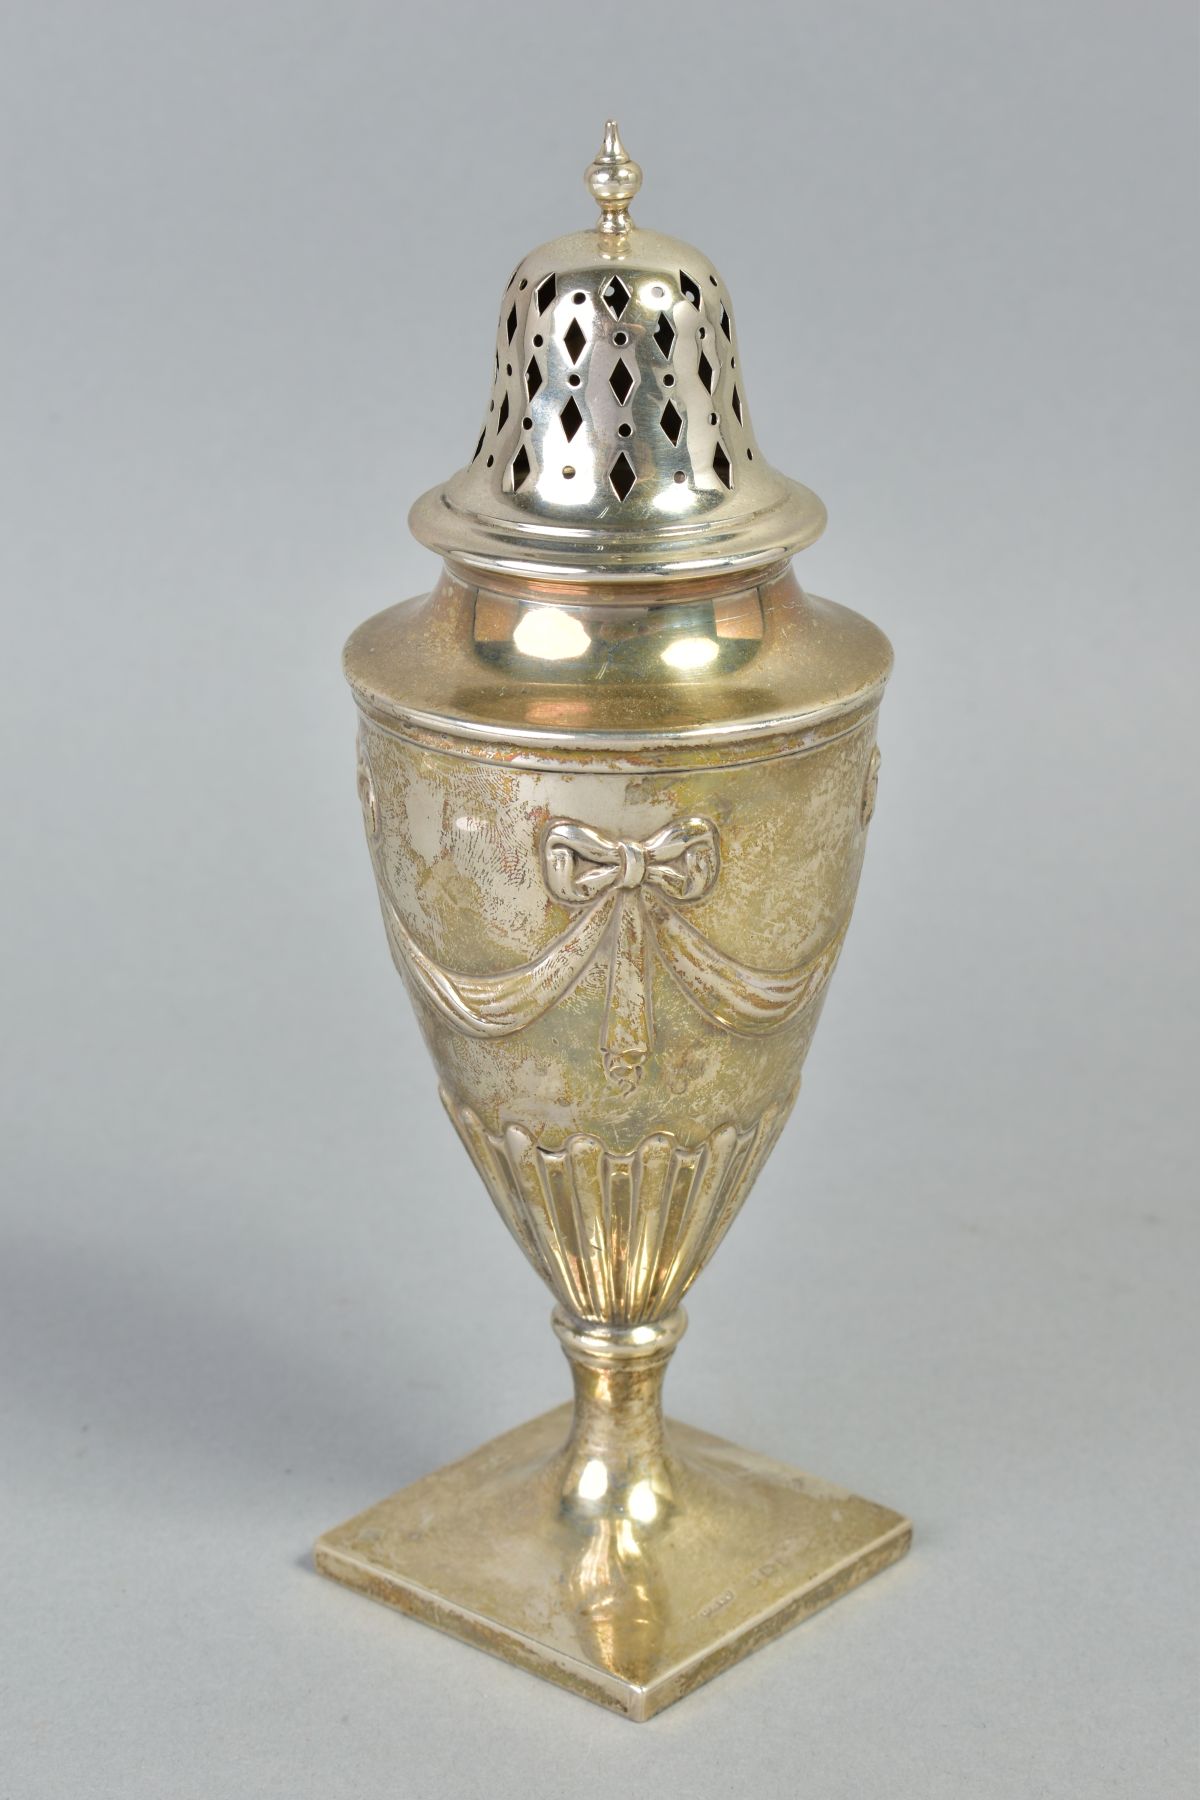 AN EDWARDIAN SILVER CASTER OF URN FORM, pierced domed cover with knopped finial, the base embossed